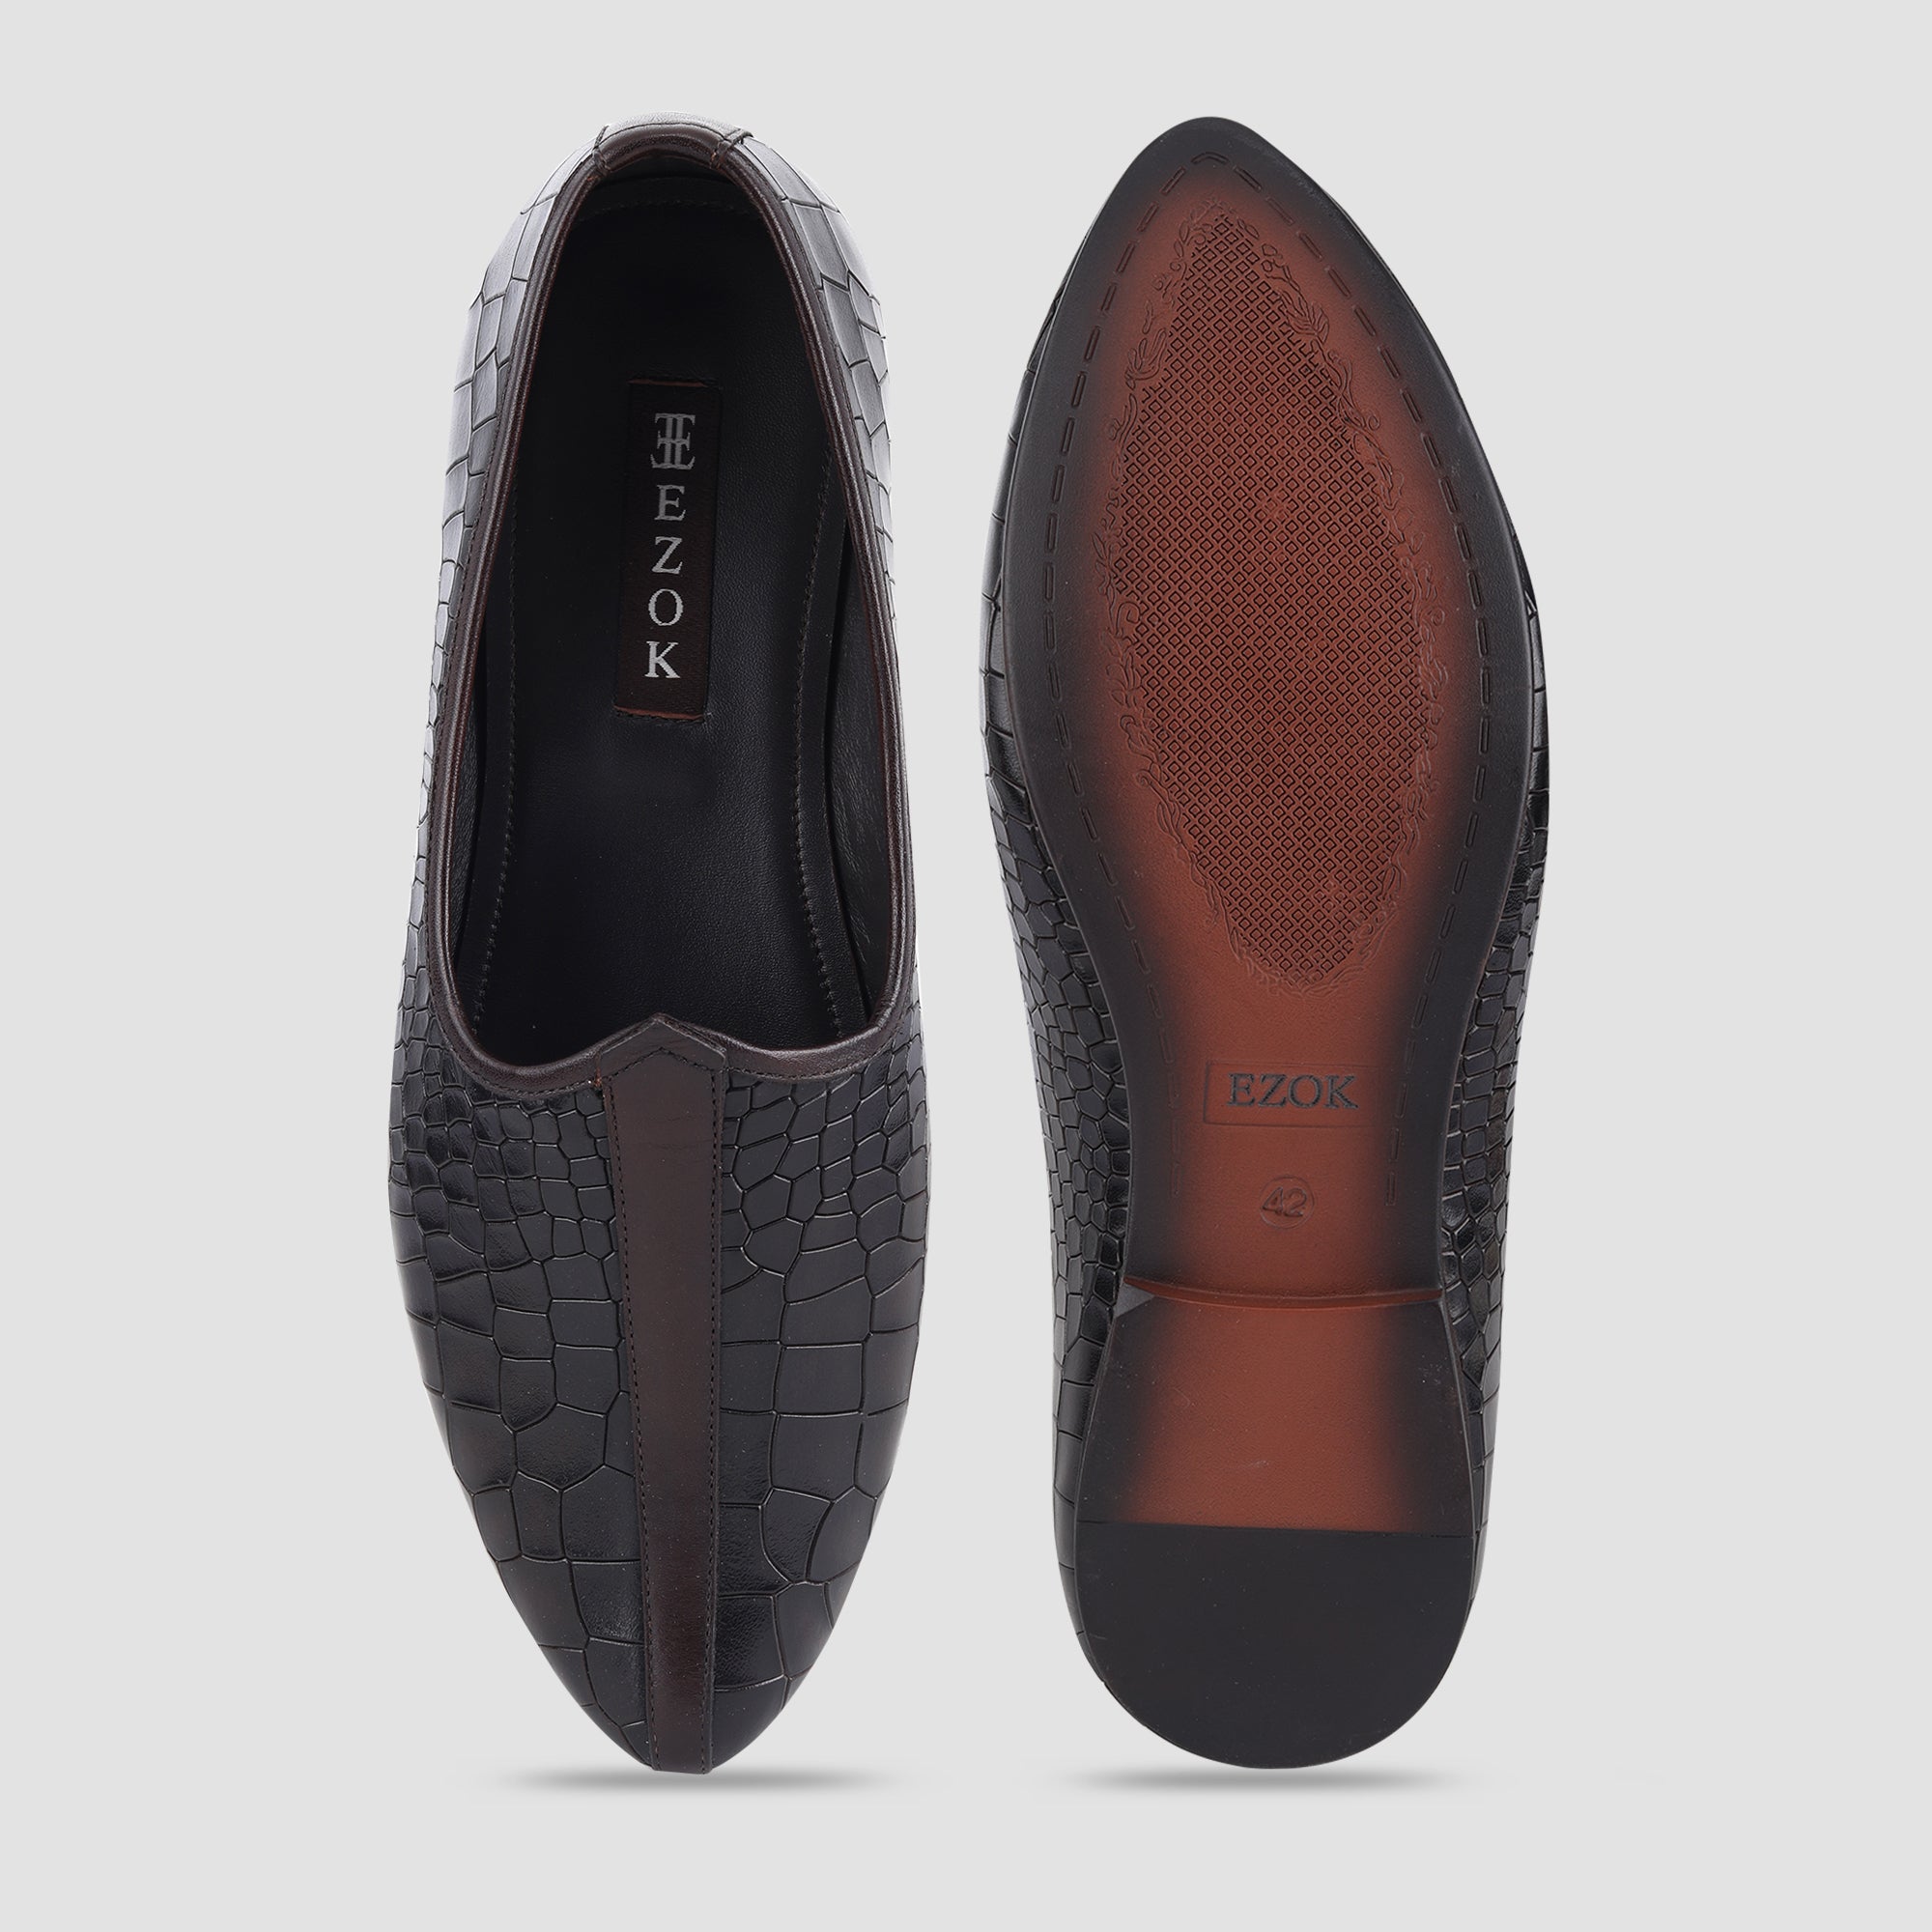 Ezok Chocolate Leather Loafer For Men